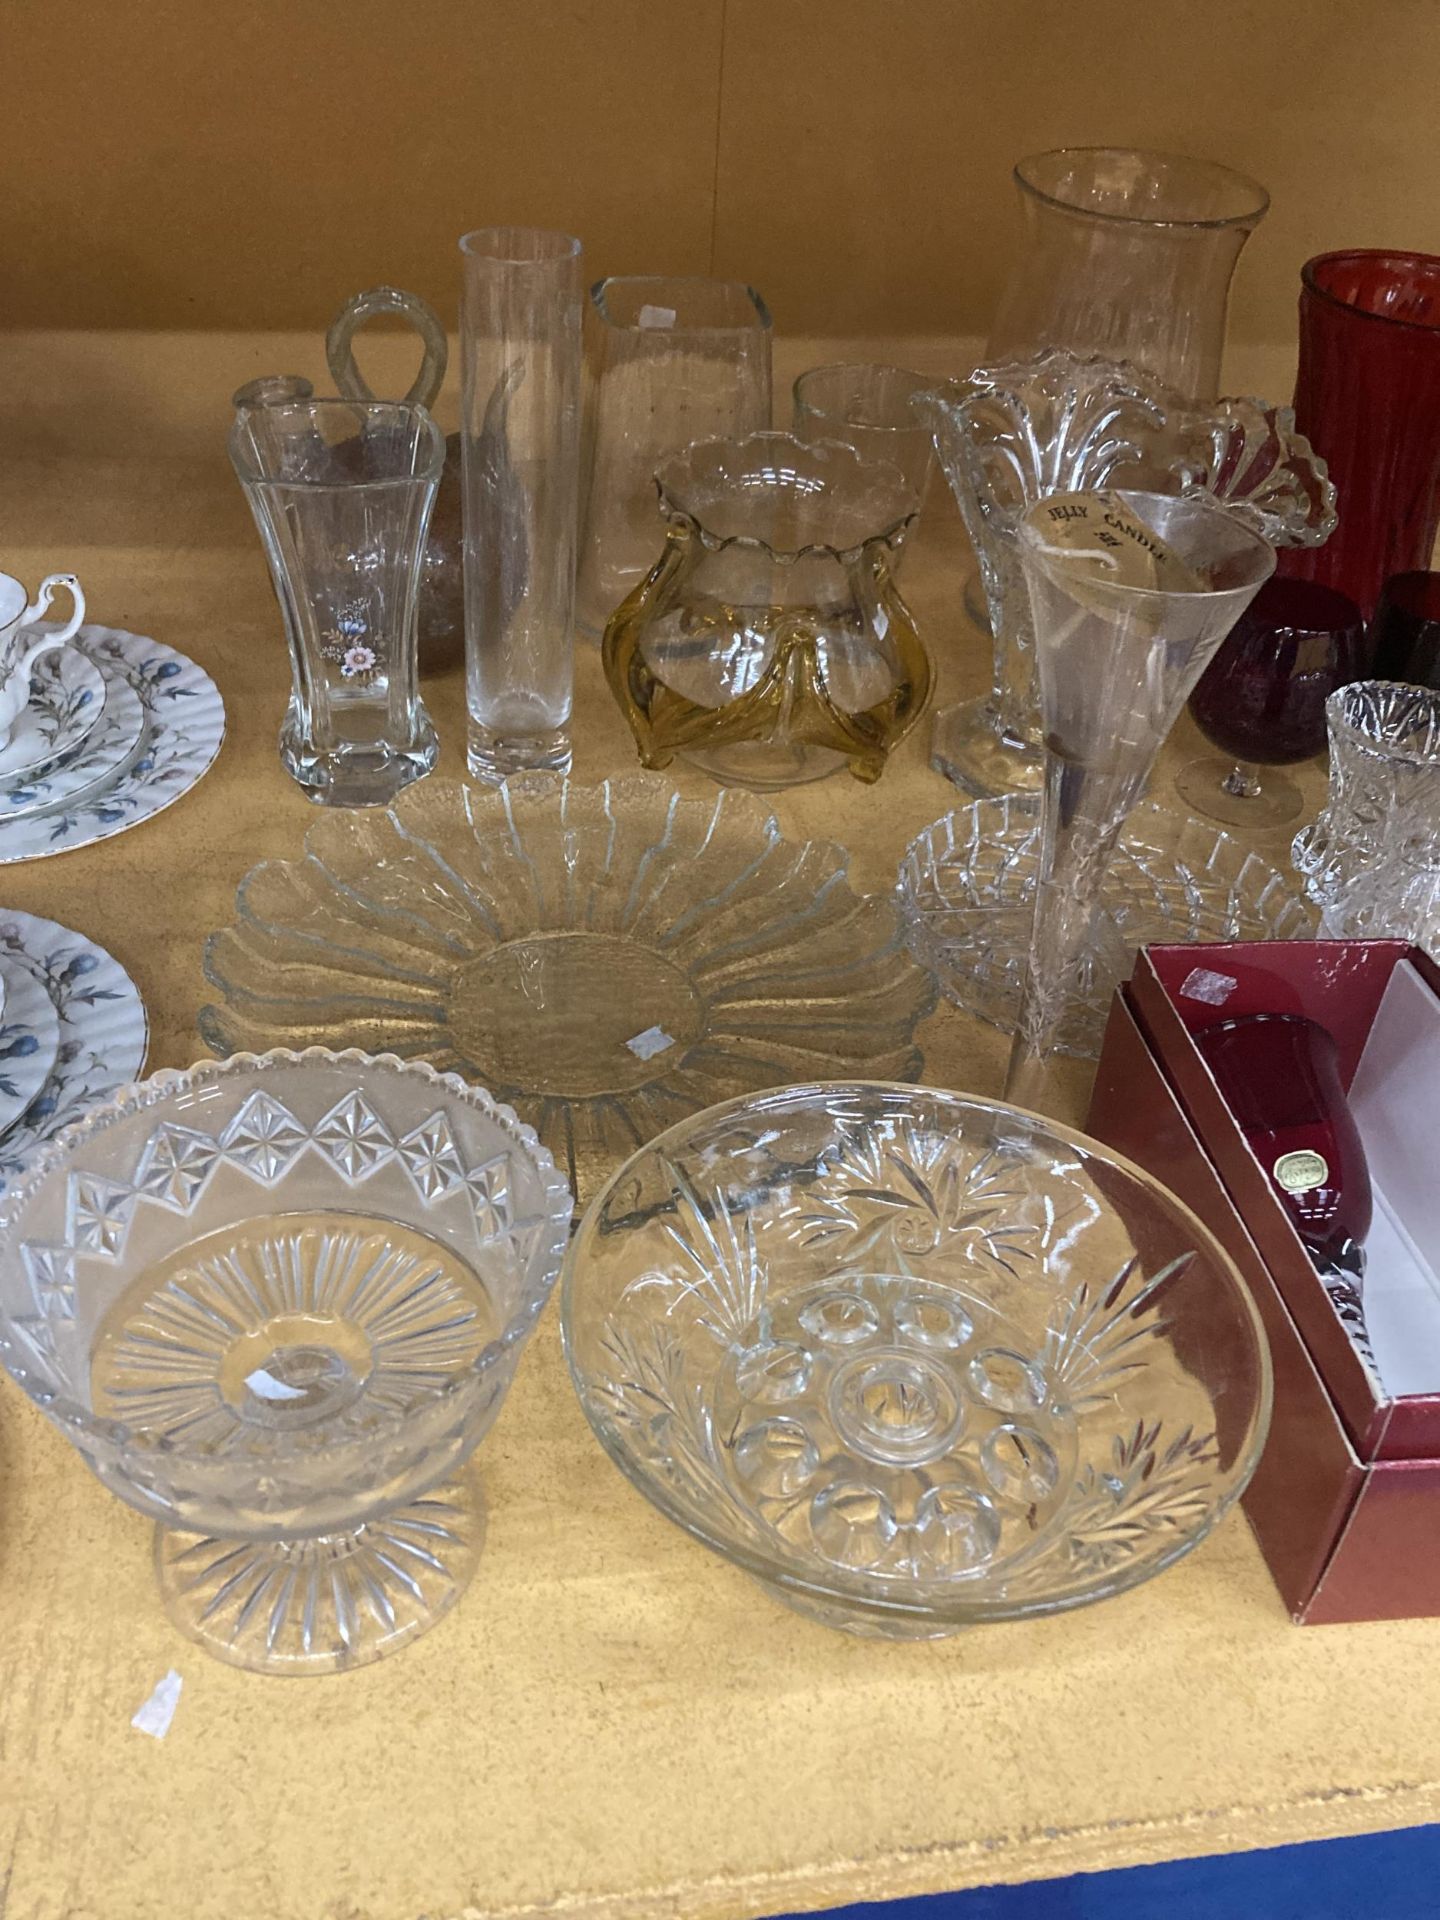 A MIXED COLLECTION OF GLASSWARE, CRANBERRY GLASS ITEMS ETC - Image 2 of 4